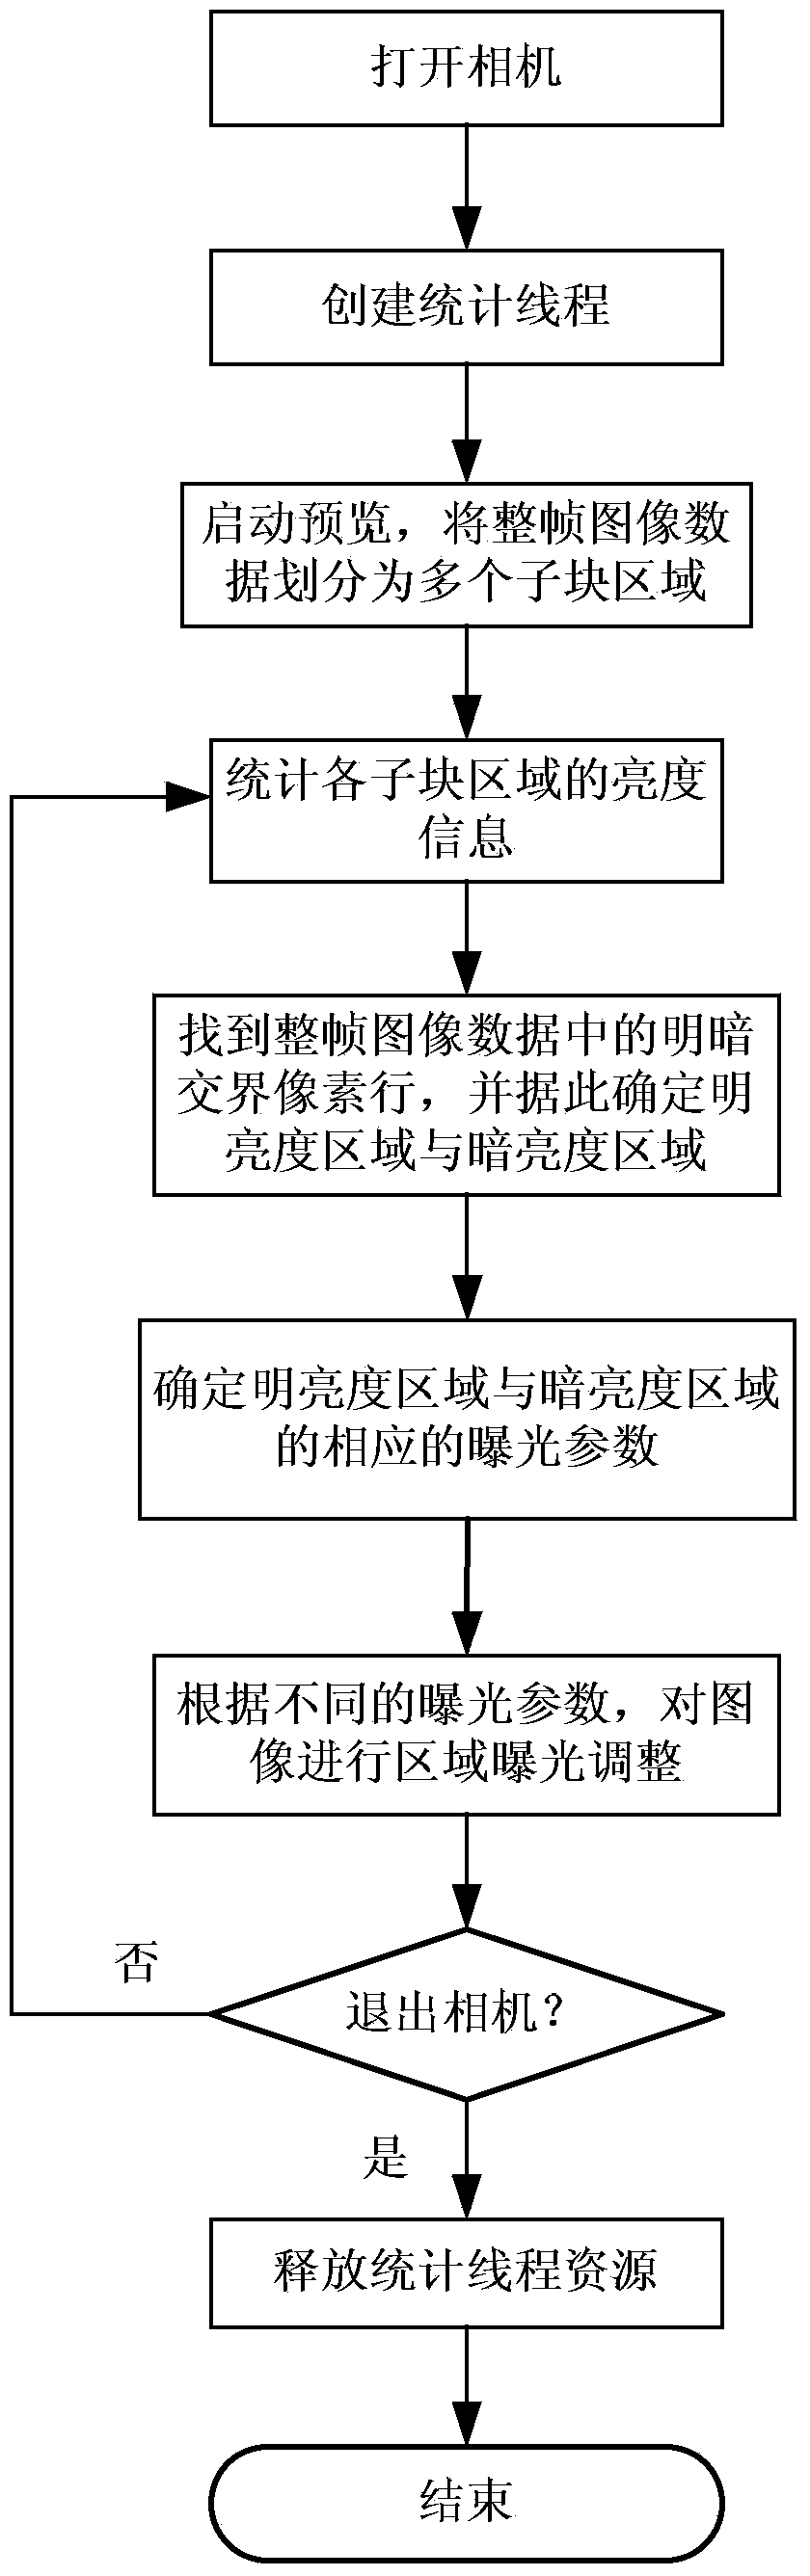 Method and system for automatically adjusting exposure effect of camera